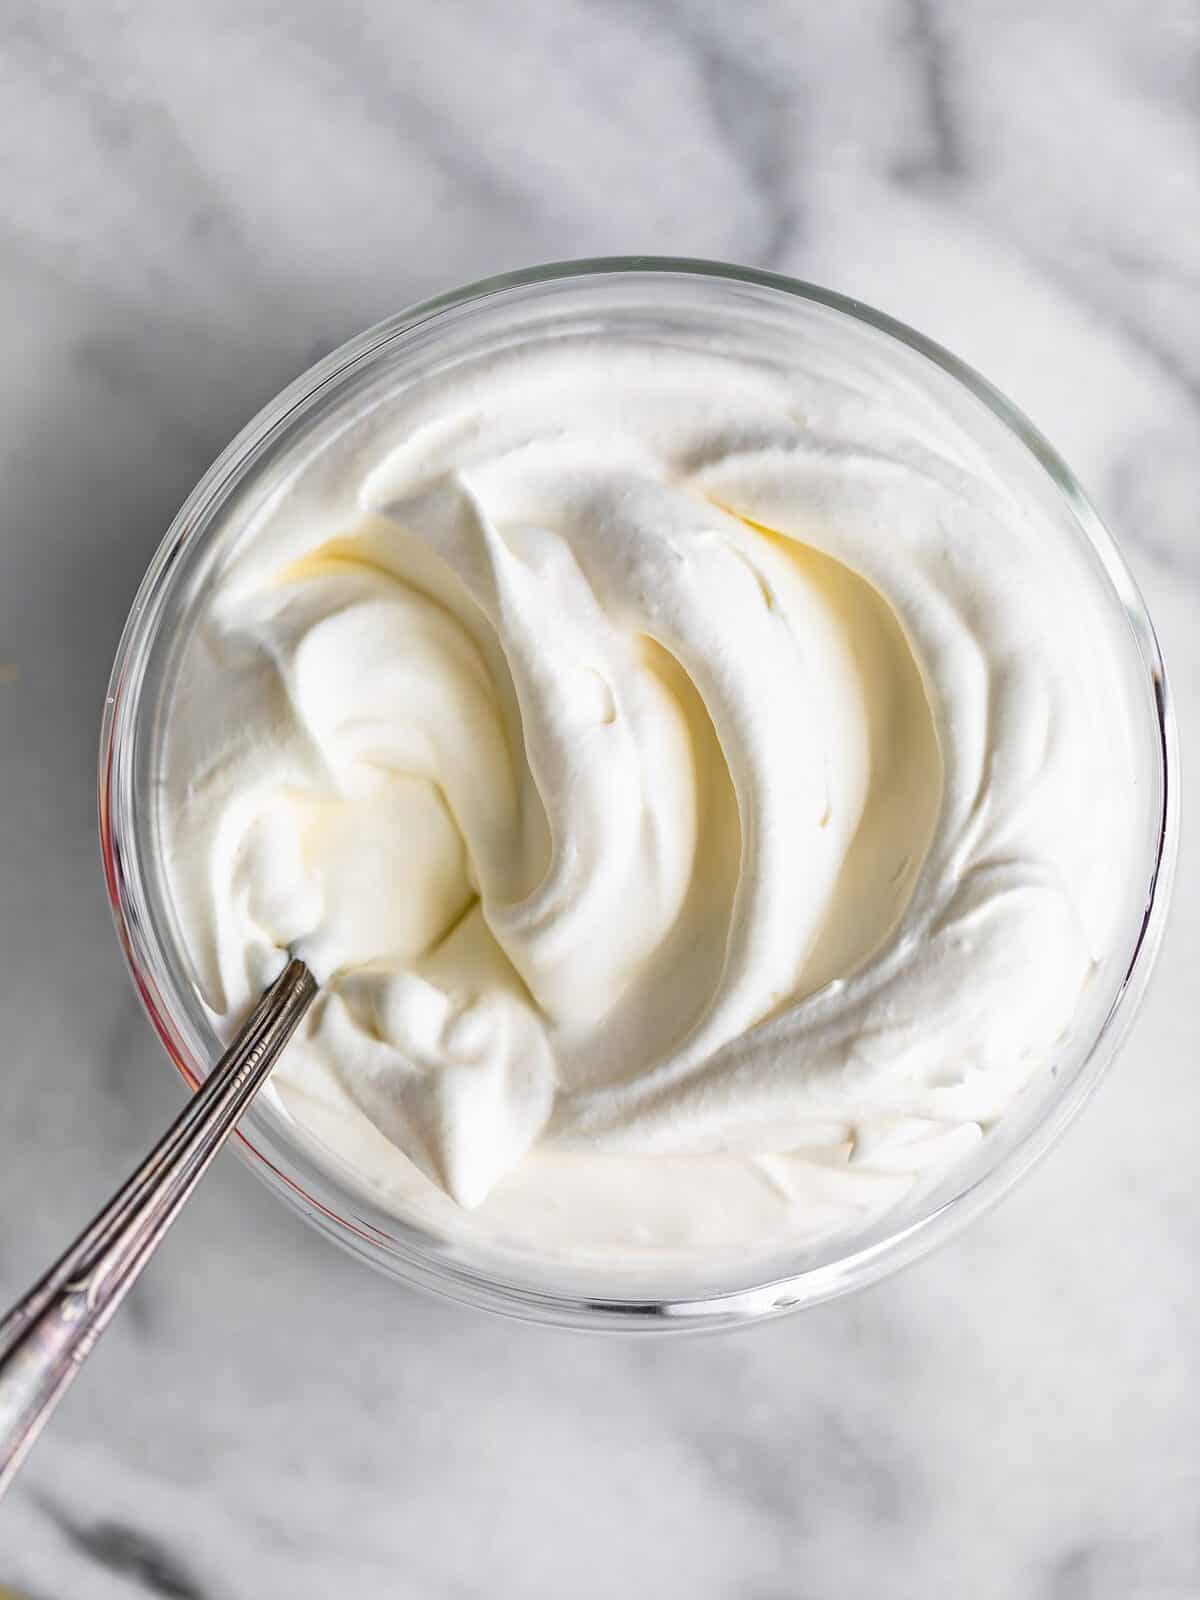 https://www.thecookierookie.com/wp-content/uploads/2023/06/stabilized-whipped-cream-homemade-cool-whip-7-of-8-edited.jpg